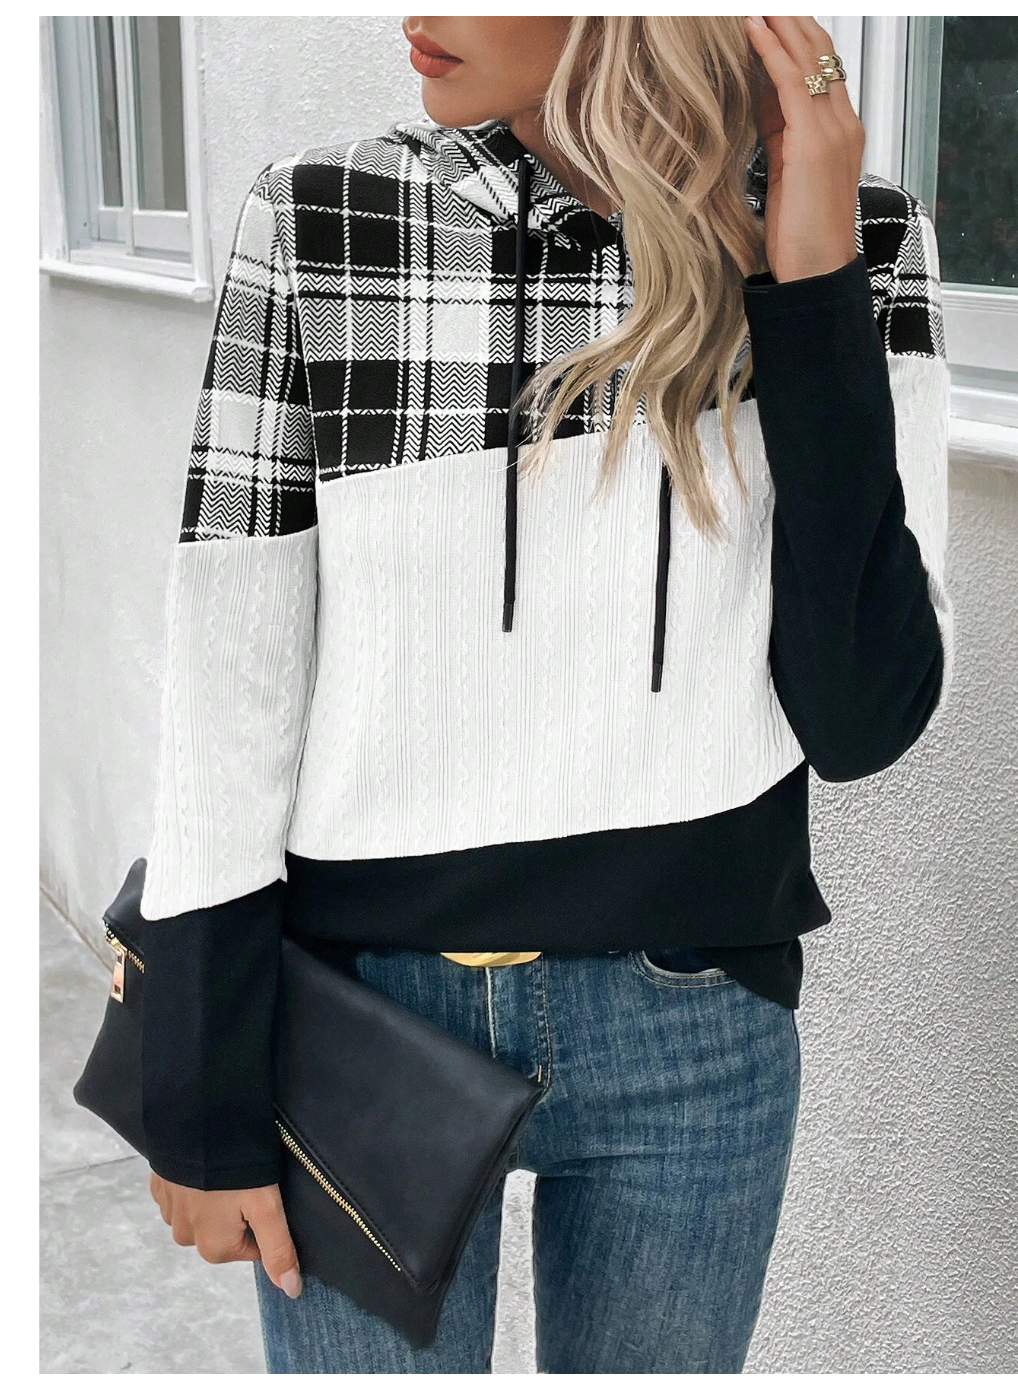 LUNE Chic Comfort: Plaid Perfection in Colorblock Harmony with Drawstring Elegance!